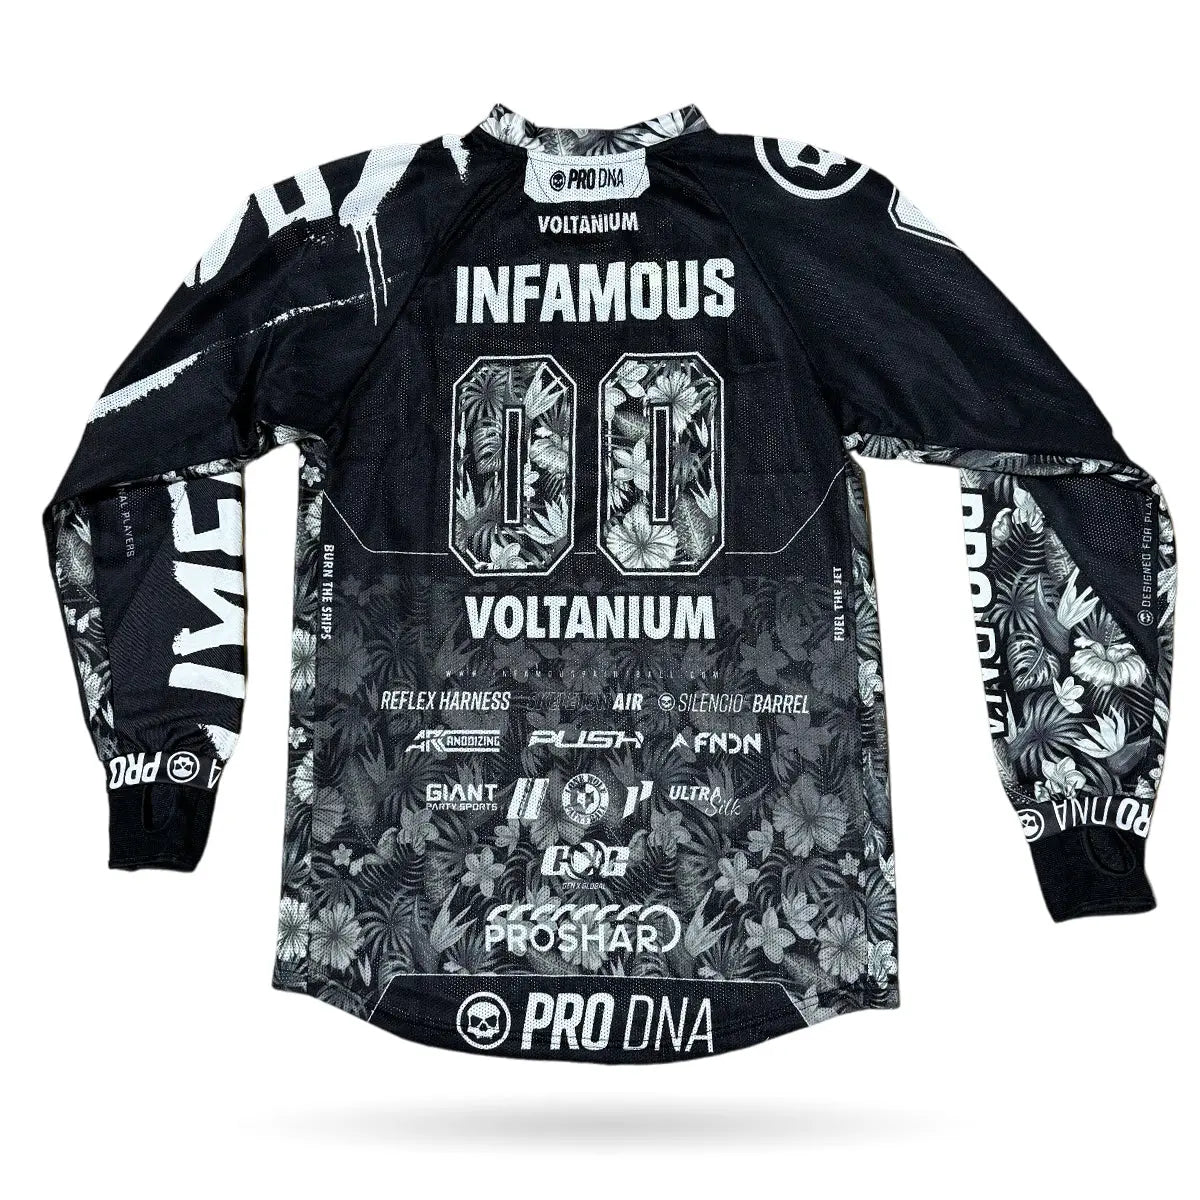 Infamous Jersey - White Tropical Infamous Paintball